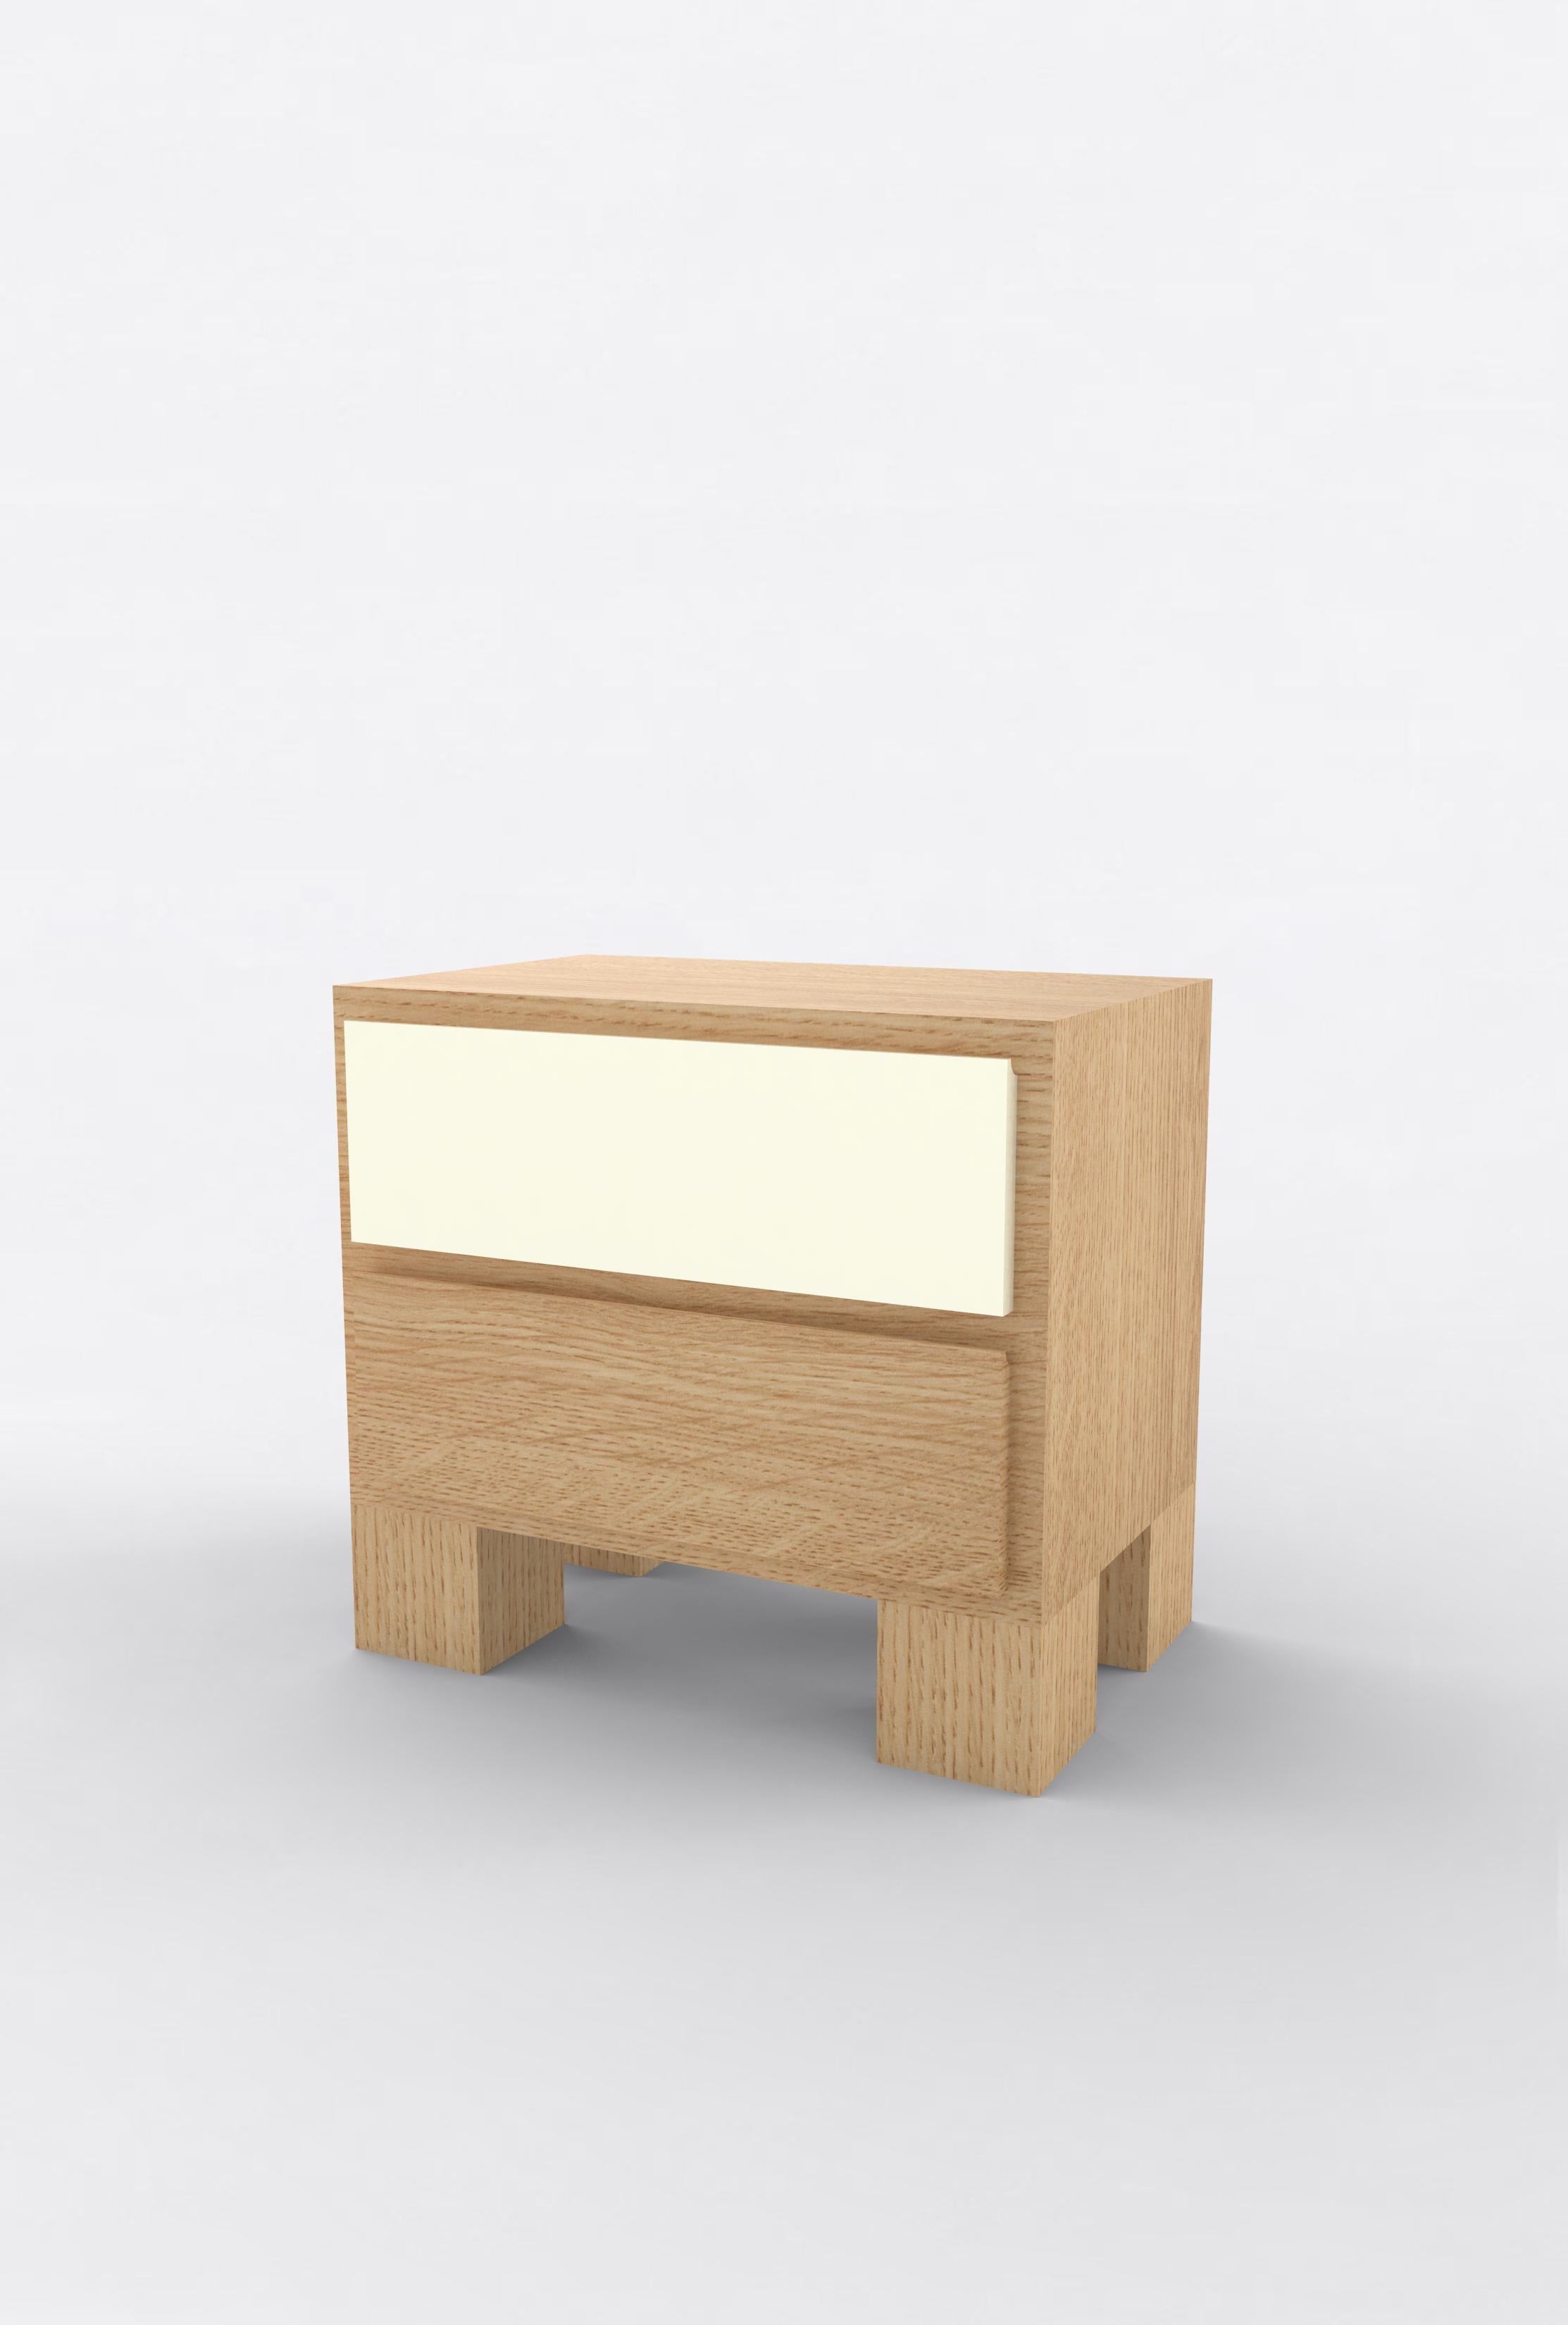 Orphan Work 101 Bedside
Shown in oak and white or off-white
Available in natural oak with painted drawer
Measures: 24” W x 15” D x 22” H
2 drawers

Orphan work is designed to complement in the heart of Soho, New York City. Each piece is handmade in